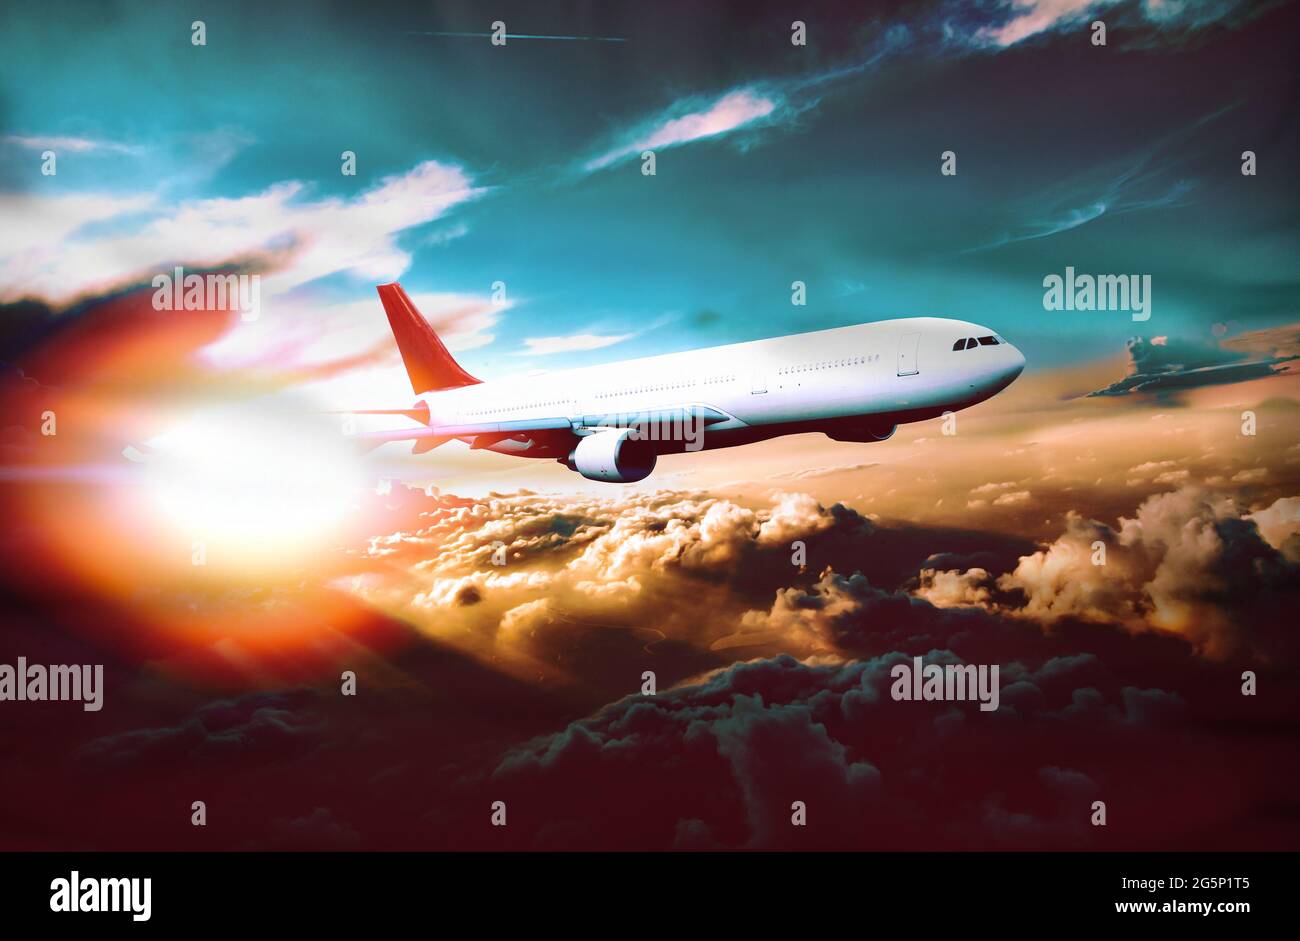 Aeroplane and scenic sunset.Vacations and tourism flying around the world.Concept of air travel and adventures background Stock Photo